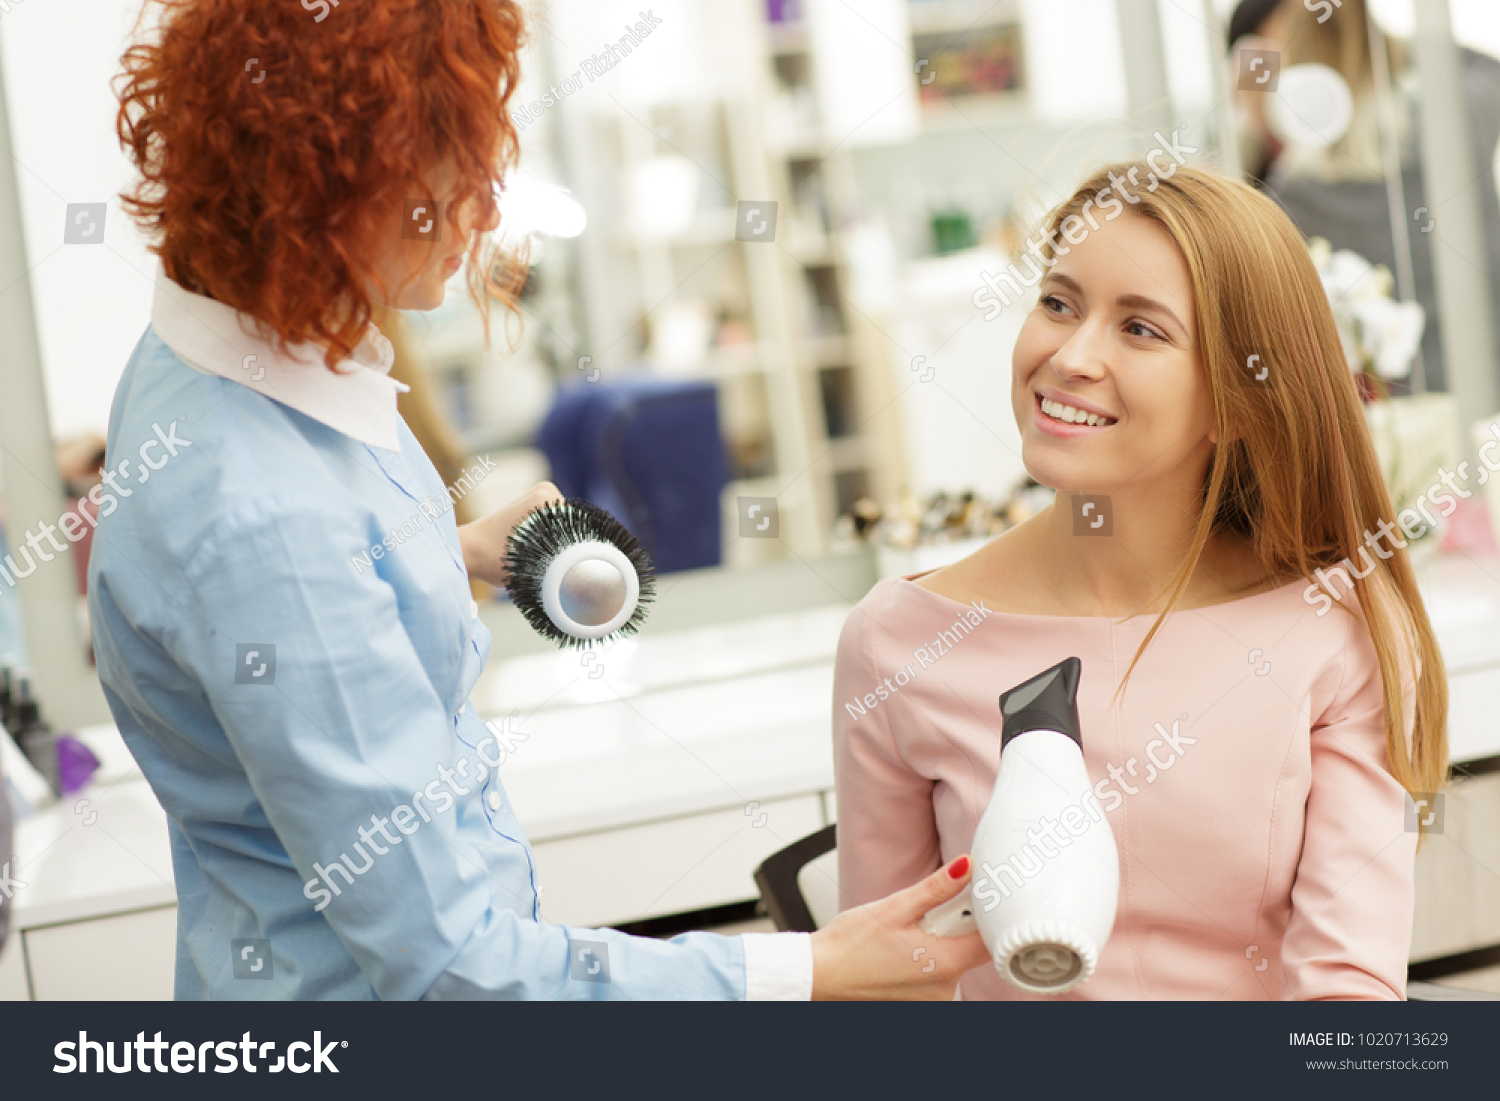 Gorgeous happy young woman smiling talking to her haordresser at the beauty salon communication people lifestyle leisure service professionalism positivity fashion pampering femininity. #1020713629